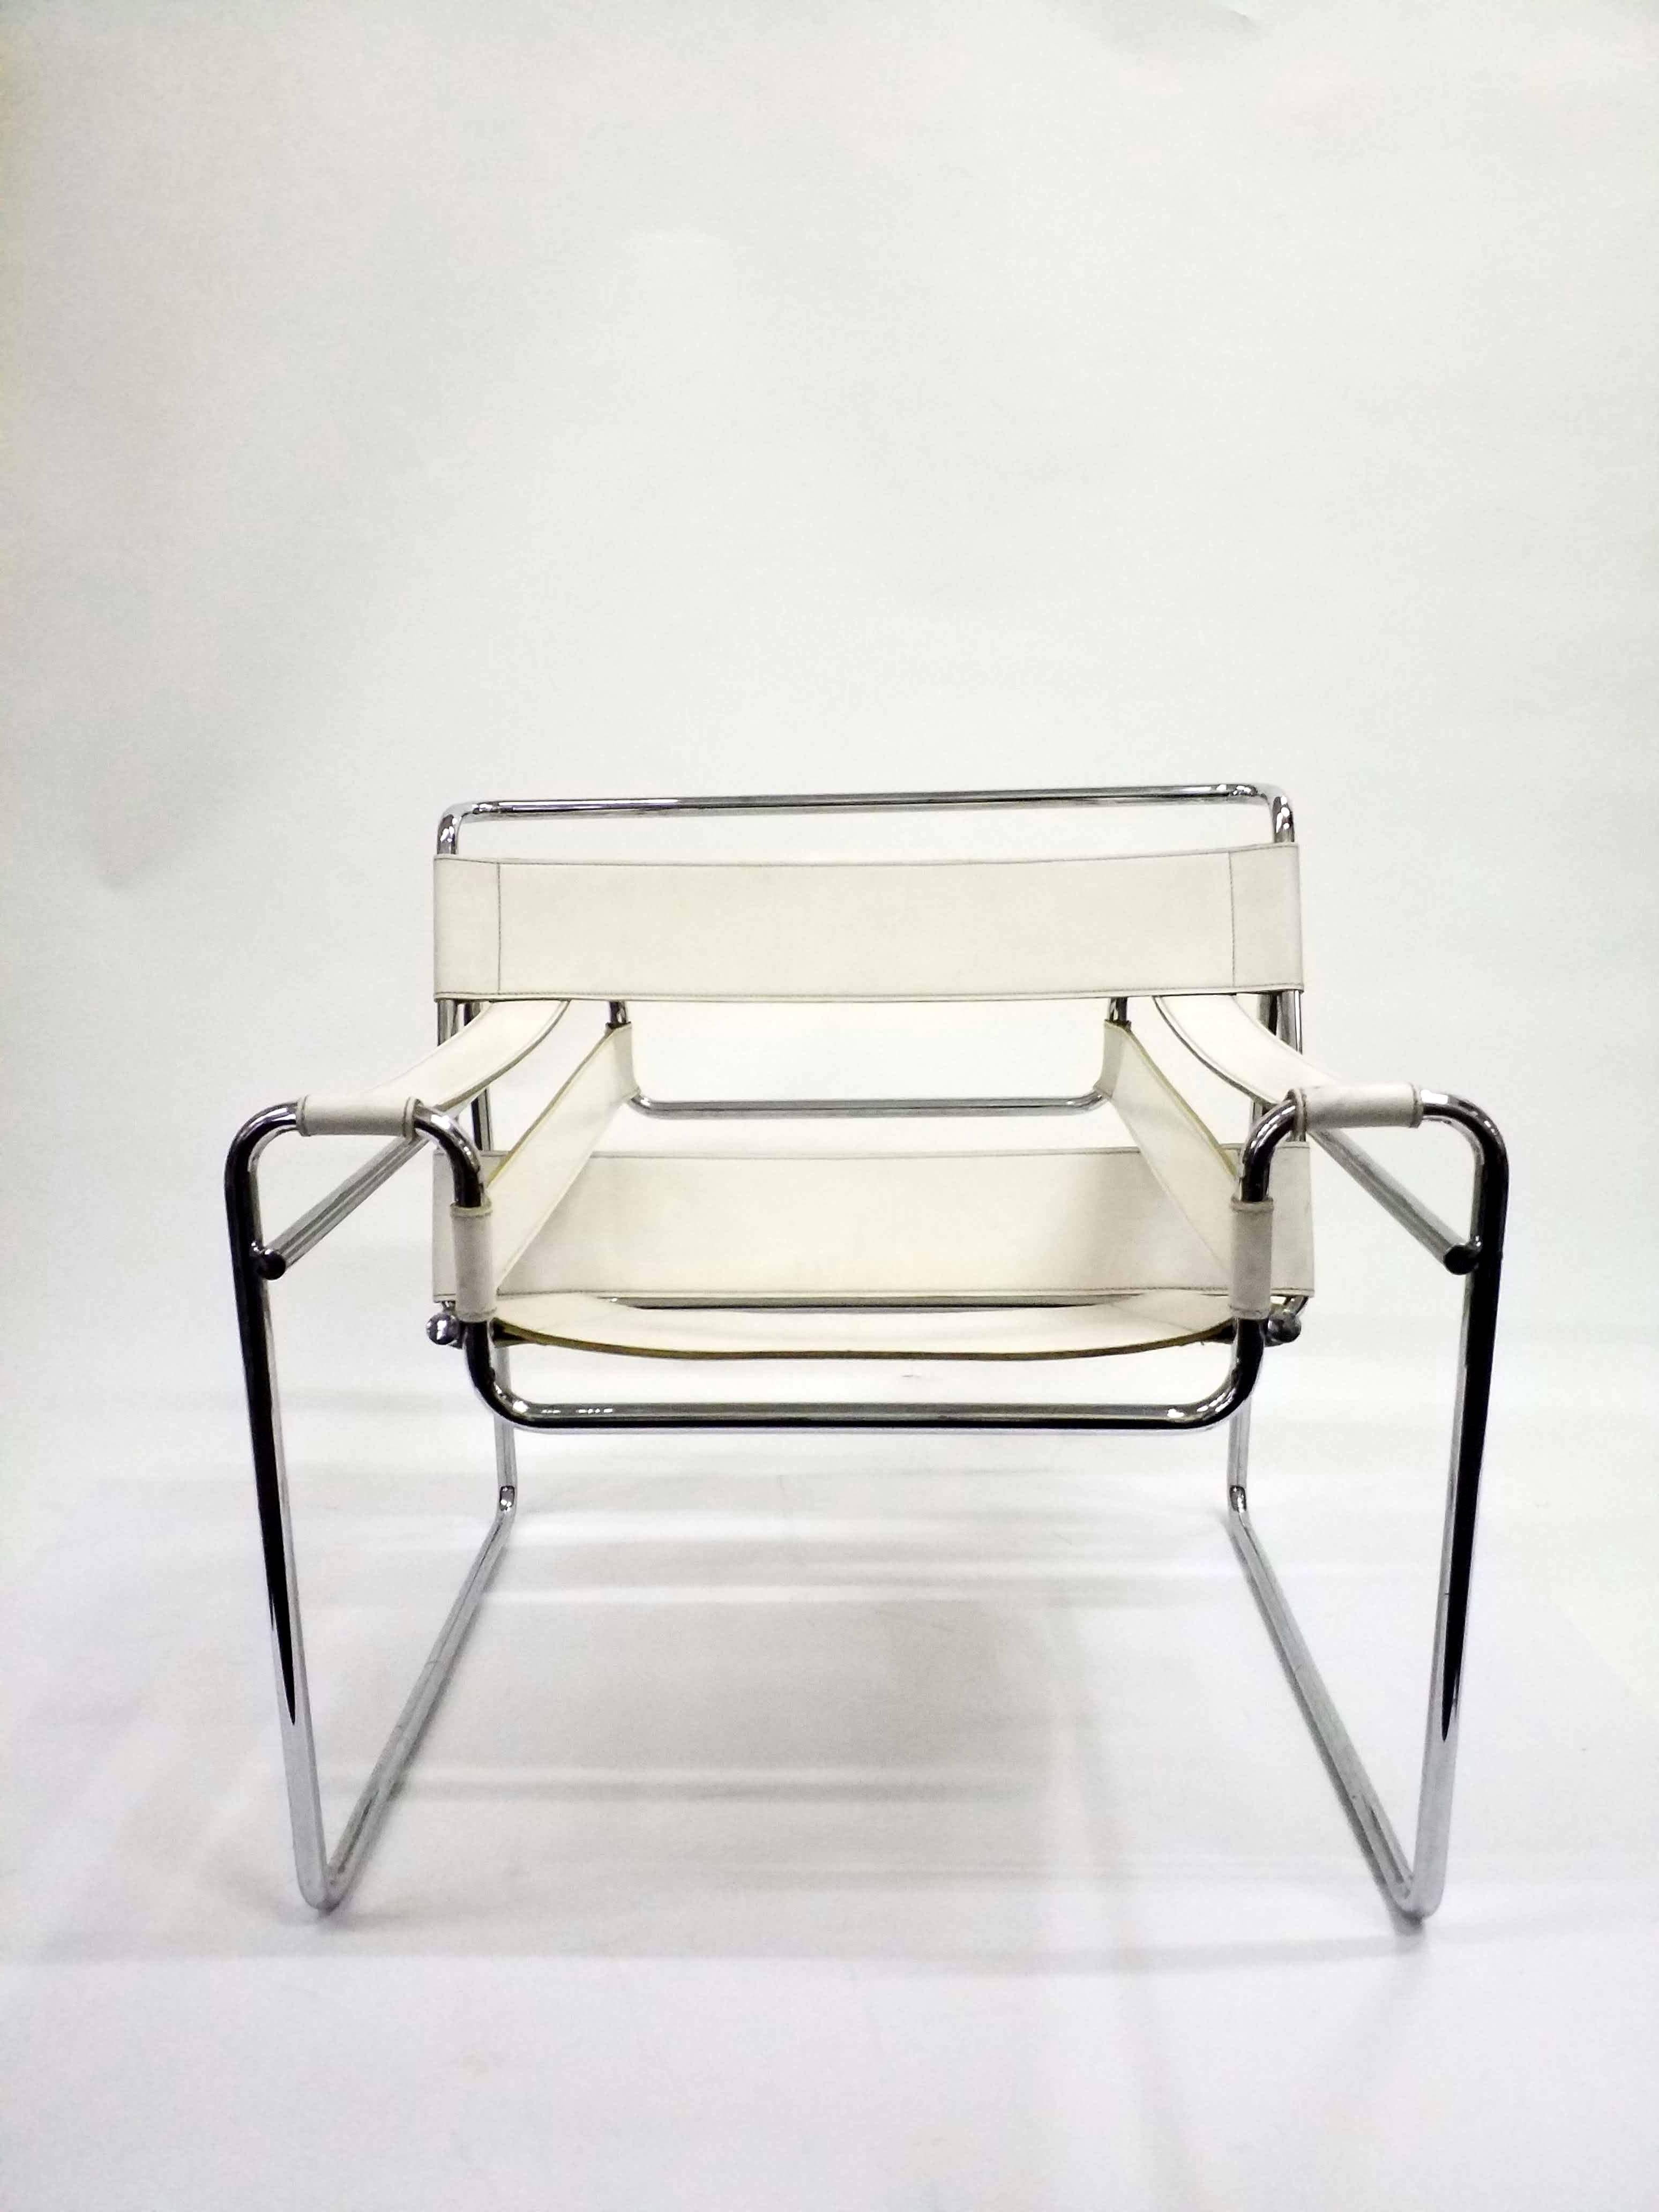 The original model B3, these high quality Wassily armchairs, design by Marcell Breuer were possibly produced by Gavina in the 1960s-1970s period. Strong white leather and chrome-plated body, these iconic pieces fit any interior.

   